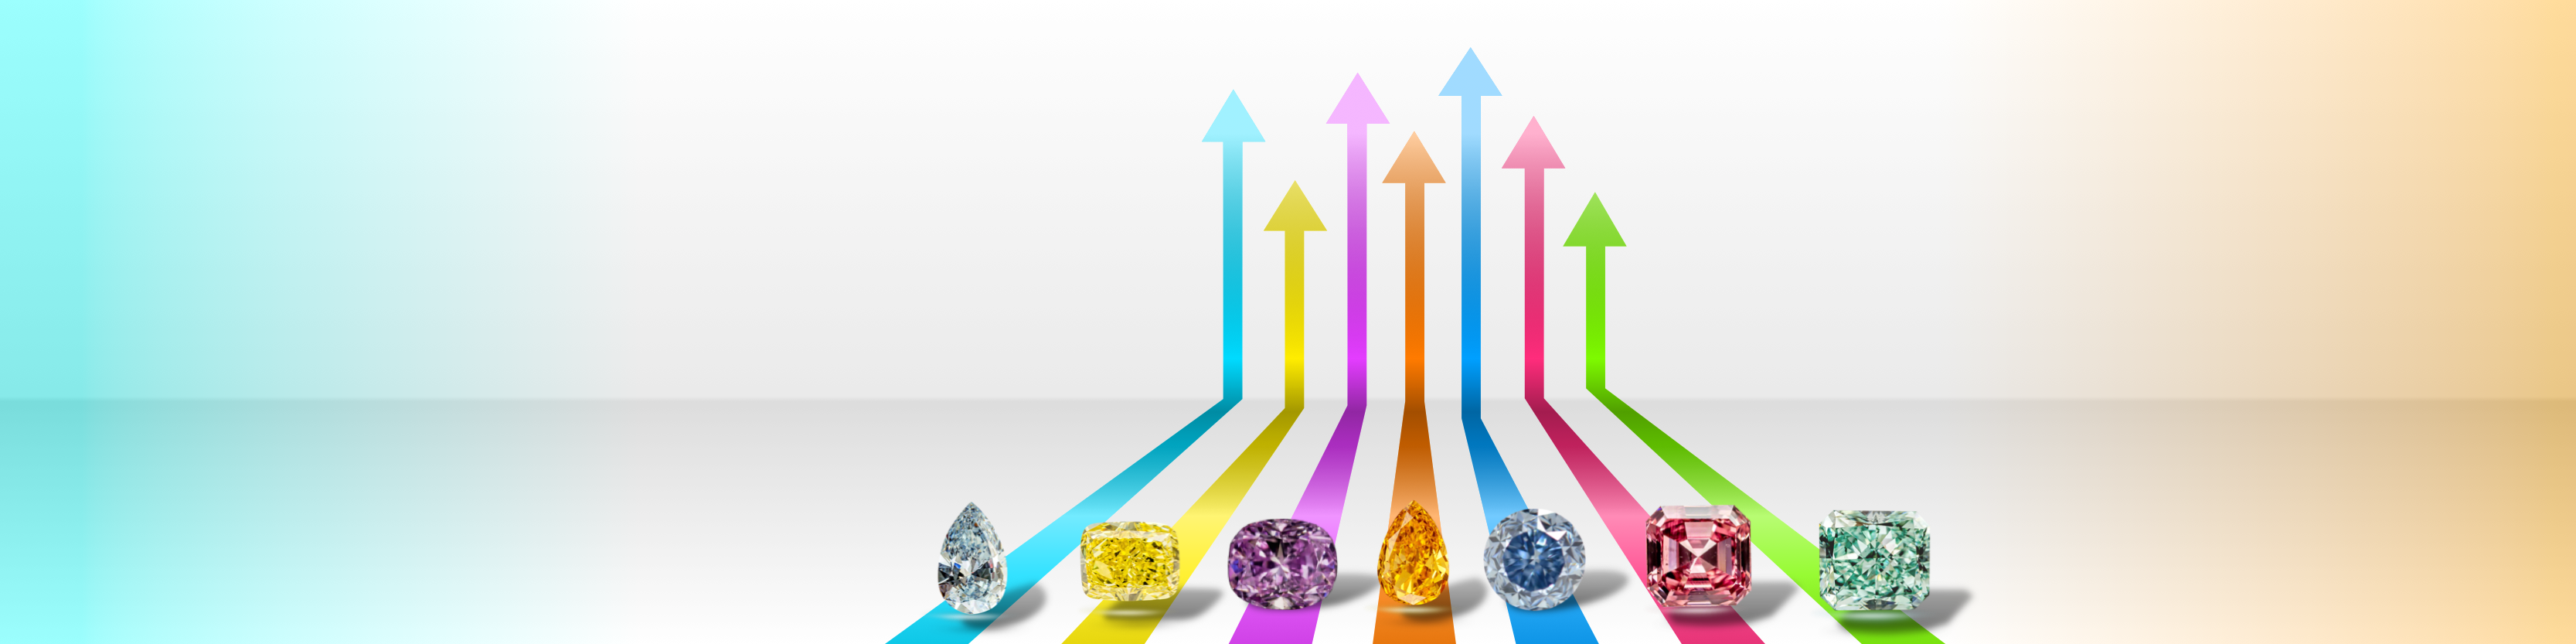 Forever Rare Color Diamonds Ltd., Operating Under Trade Name Forever Rare, Completes Acquisition of Assets, Client-Base & Goodwill of the Premier Diamond Group